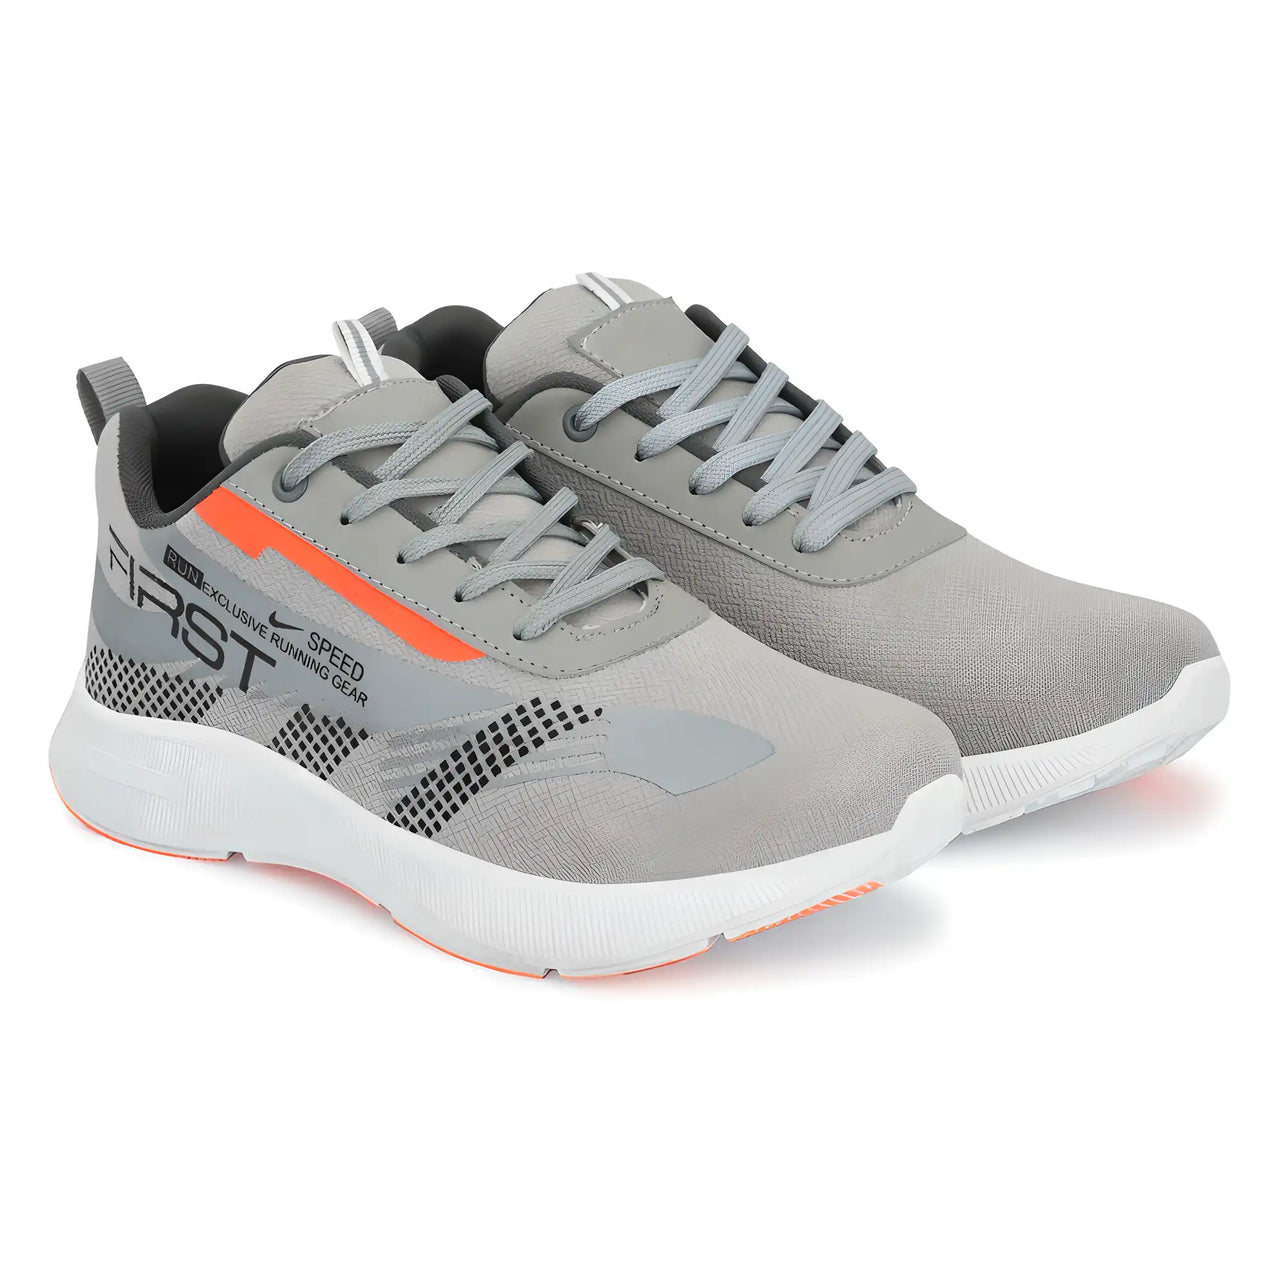 Shoe Island Casual Sneakers Sports Shoes For Men